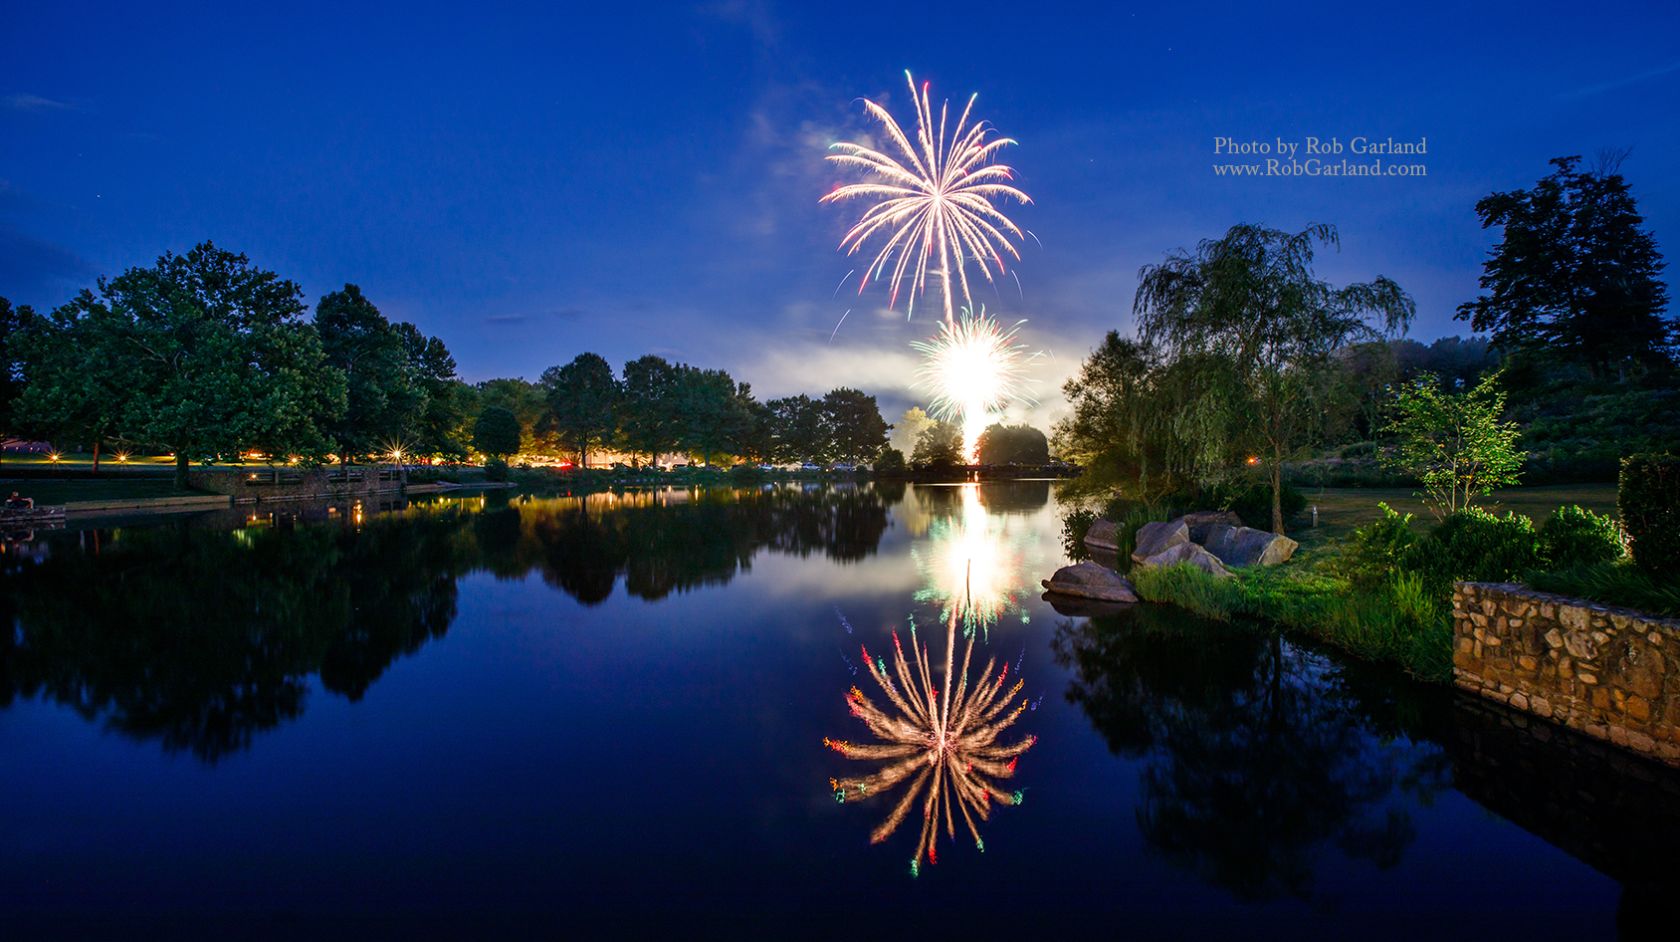 Fireworks In The Sky Over A Body Of Water